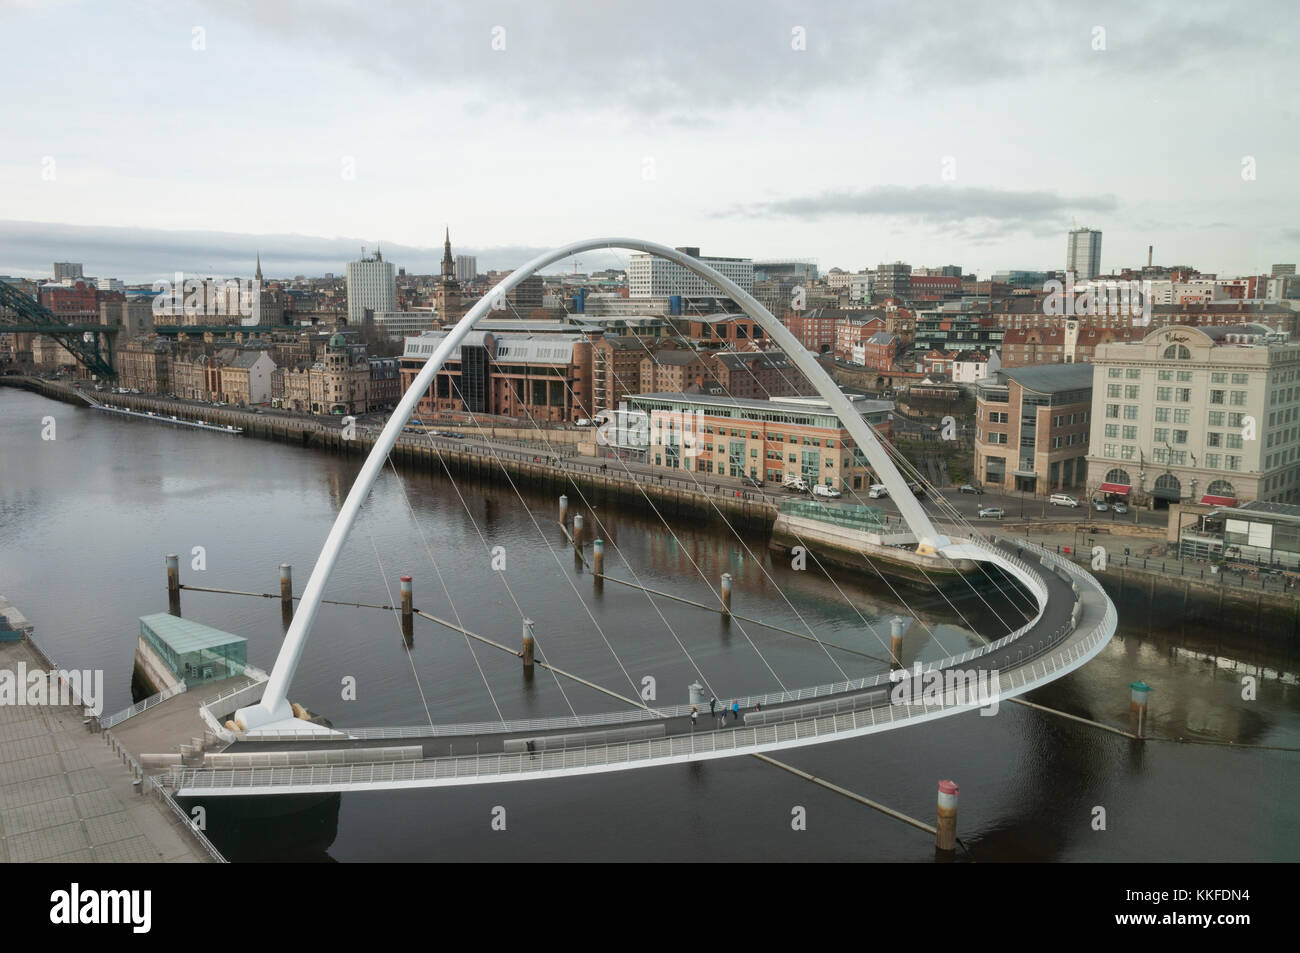 Looking down at the Millennium bridge, that stretches' between the two quaysides of Newcastle Upon Tyne and Gateshead in North East England. Stock Photo